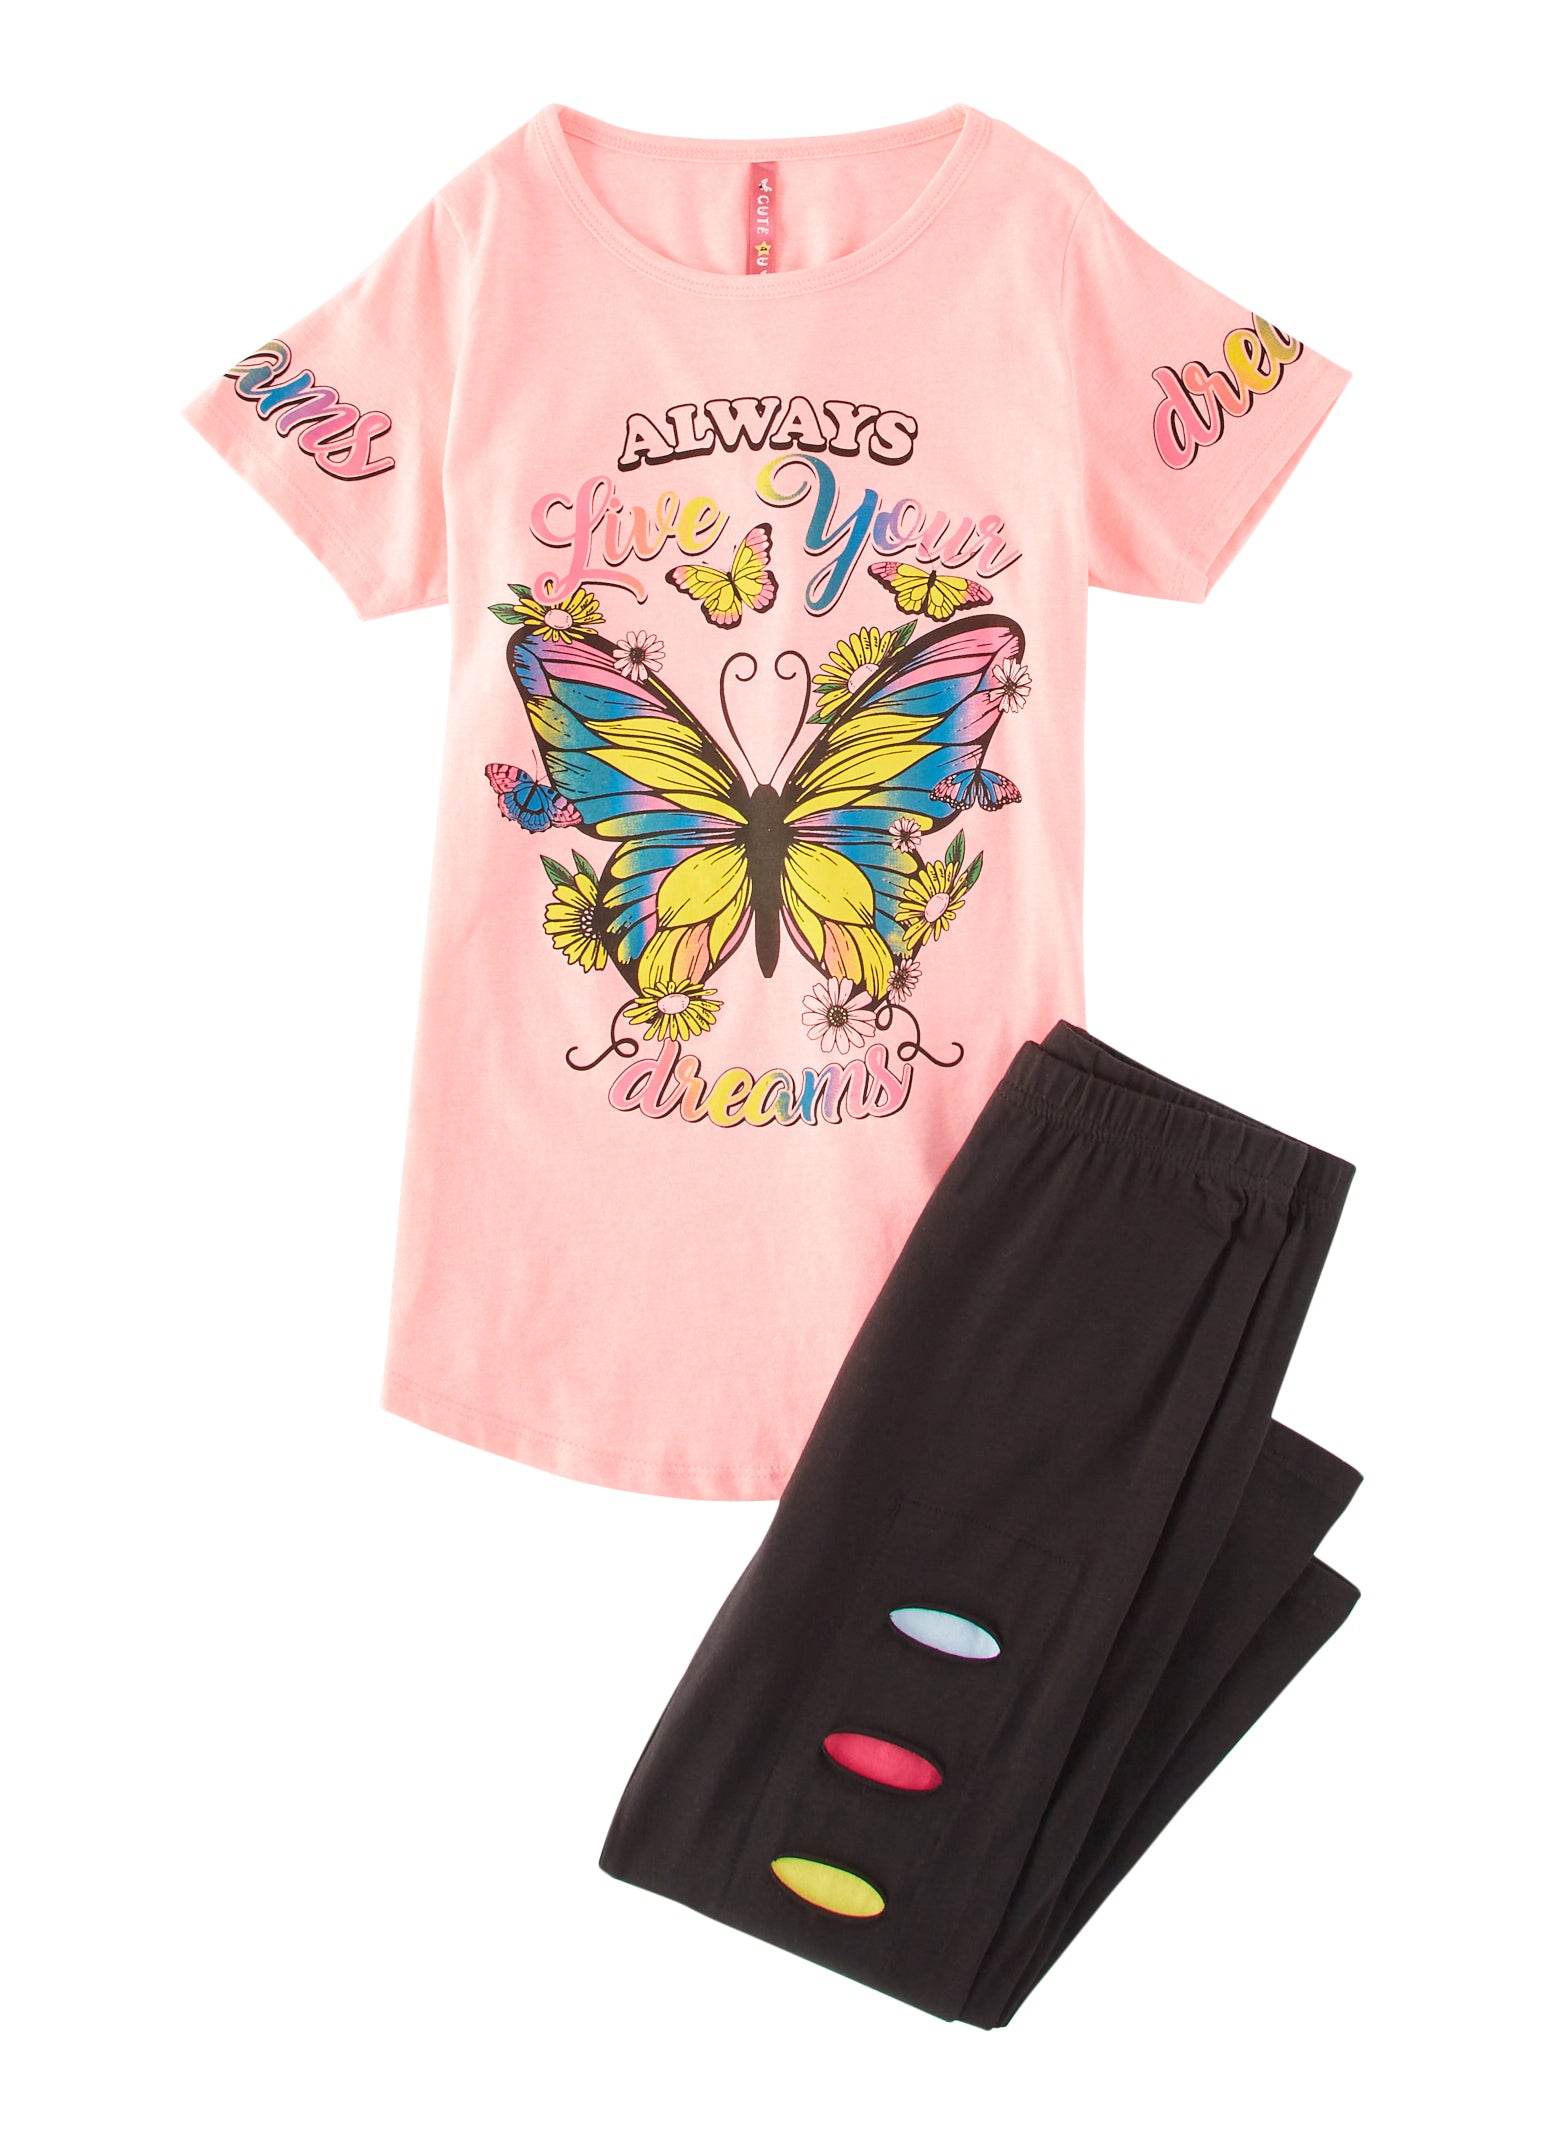 Girls Always Live Your Dreams Graphic Tee and Leggings - Pink